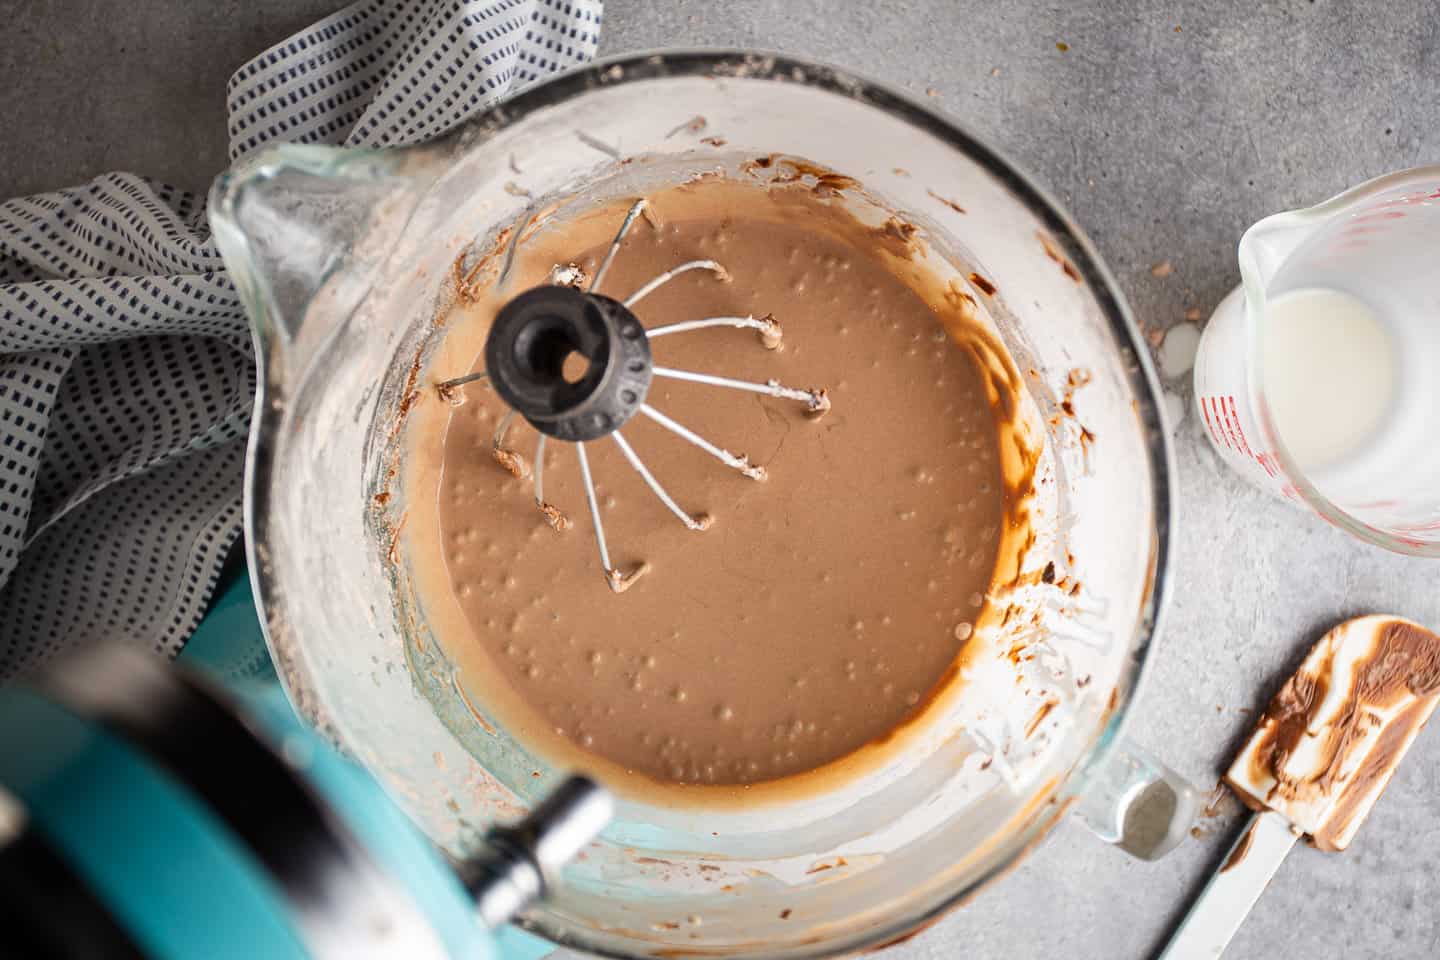 Chocolate whipped cream before whipping.